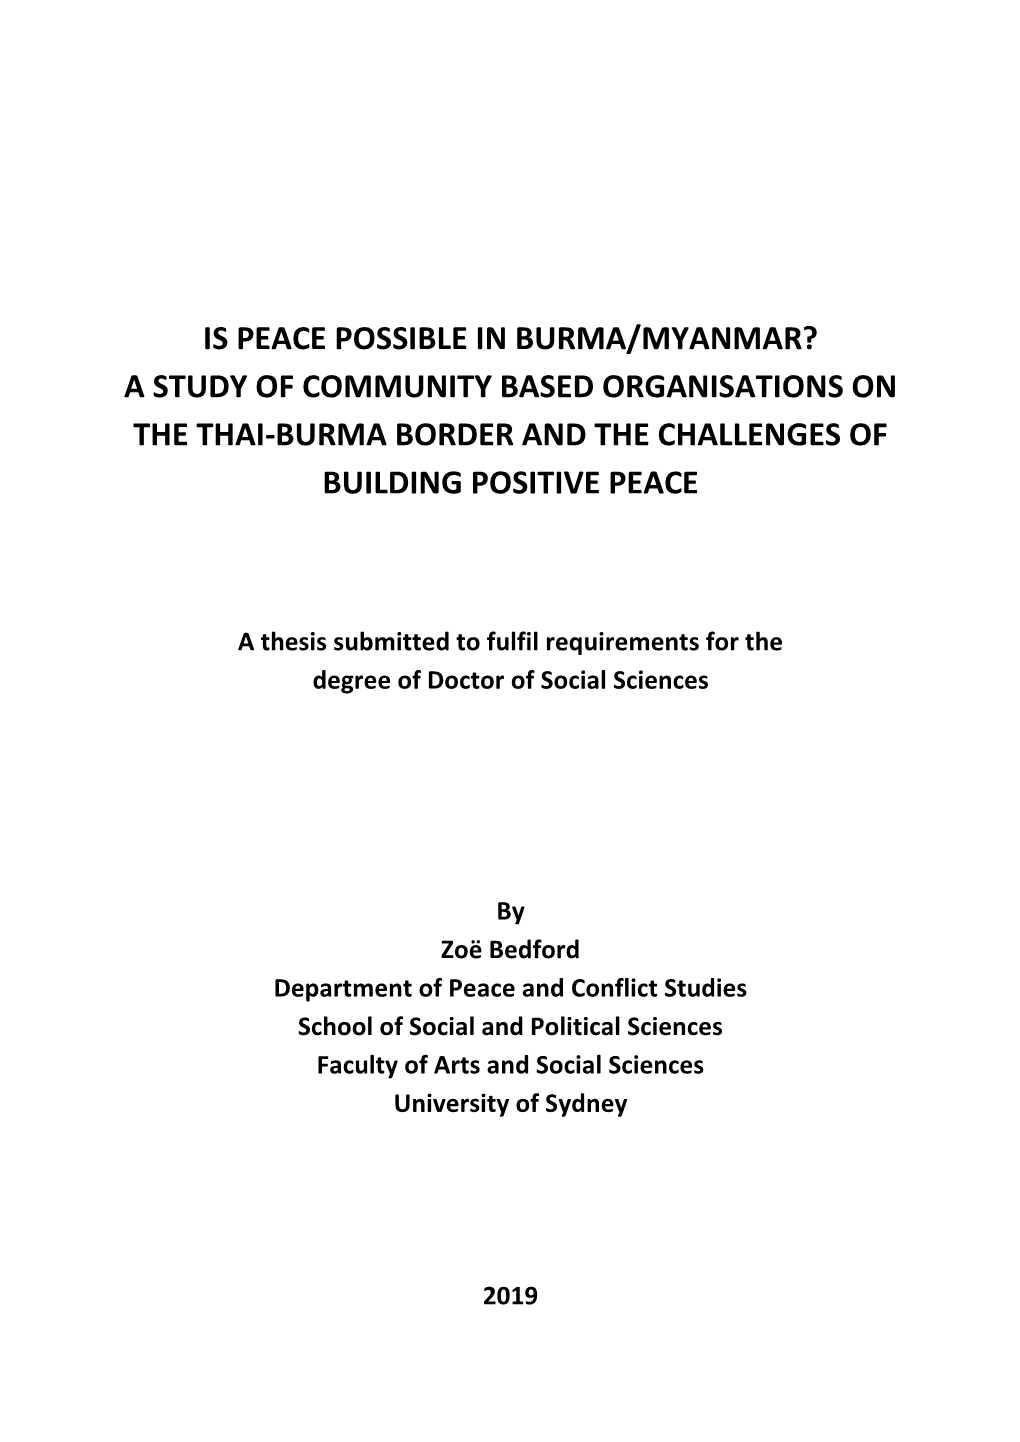 Is Peace Possible in Burma/Myanmar? a Study of Community Based Organisations on the Thai-Burma Border and the Challenges of Building Positive Peace